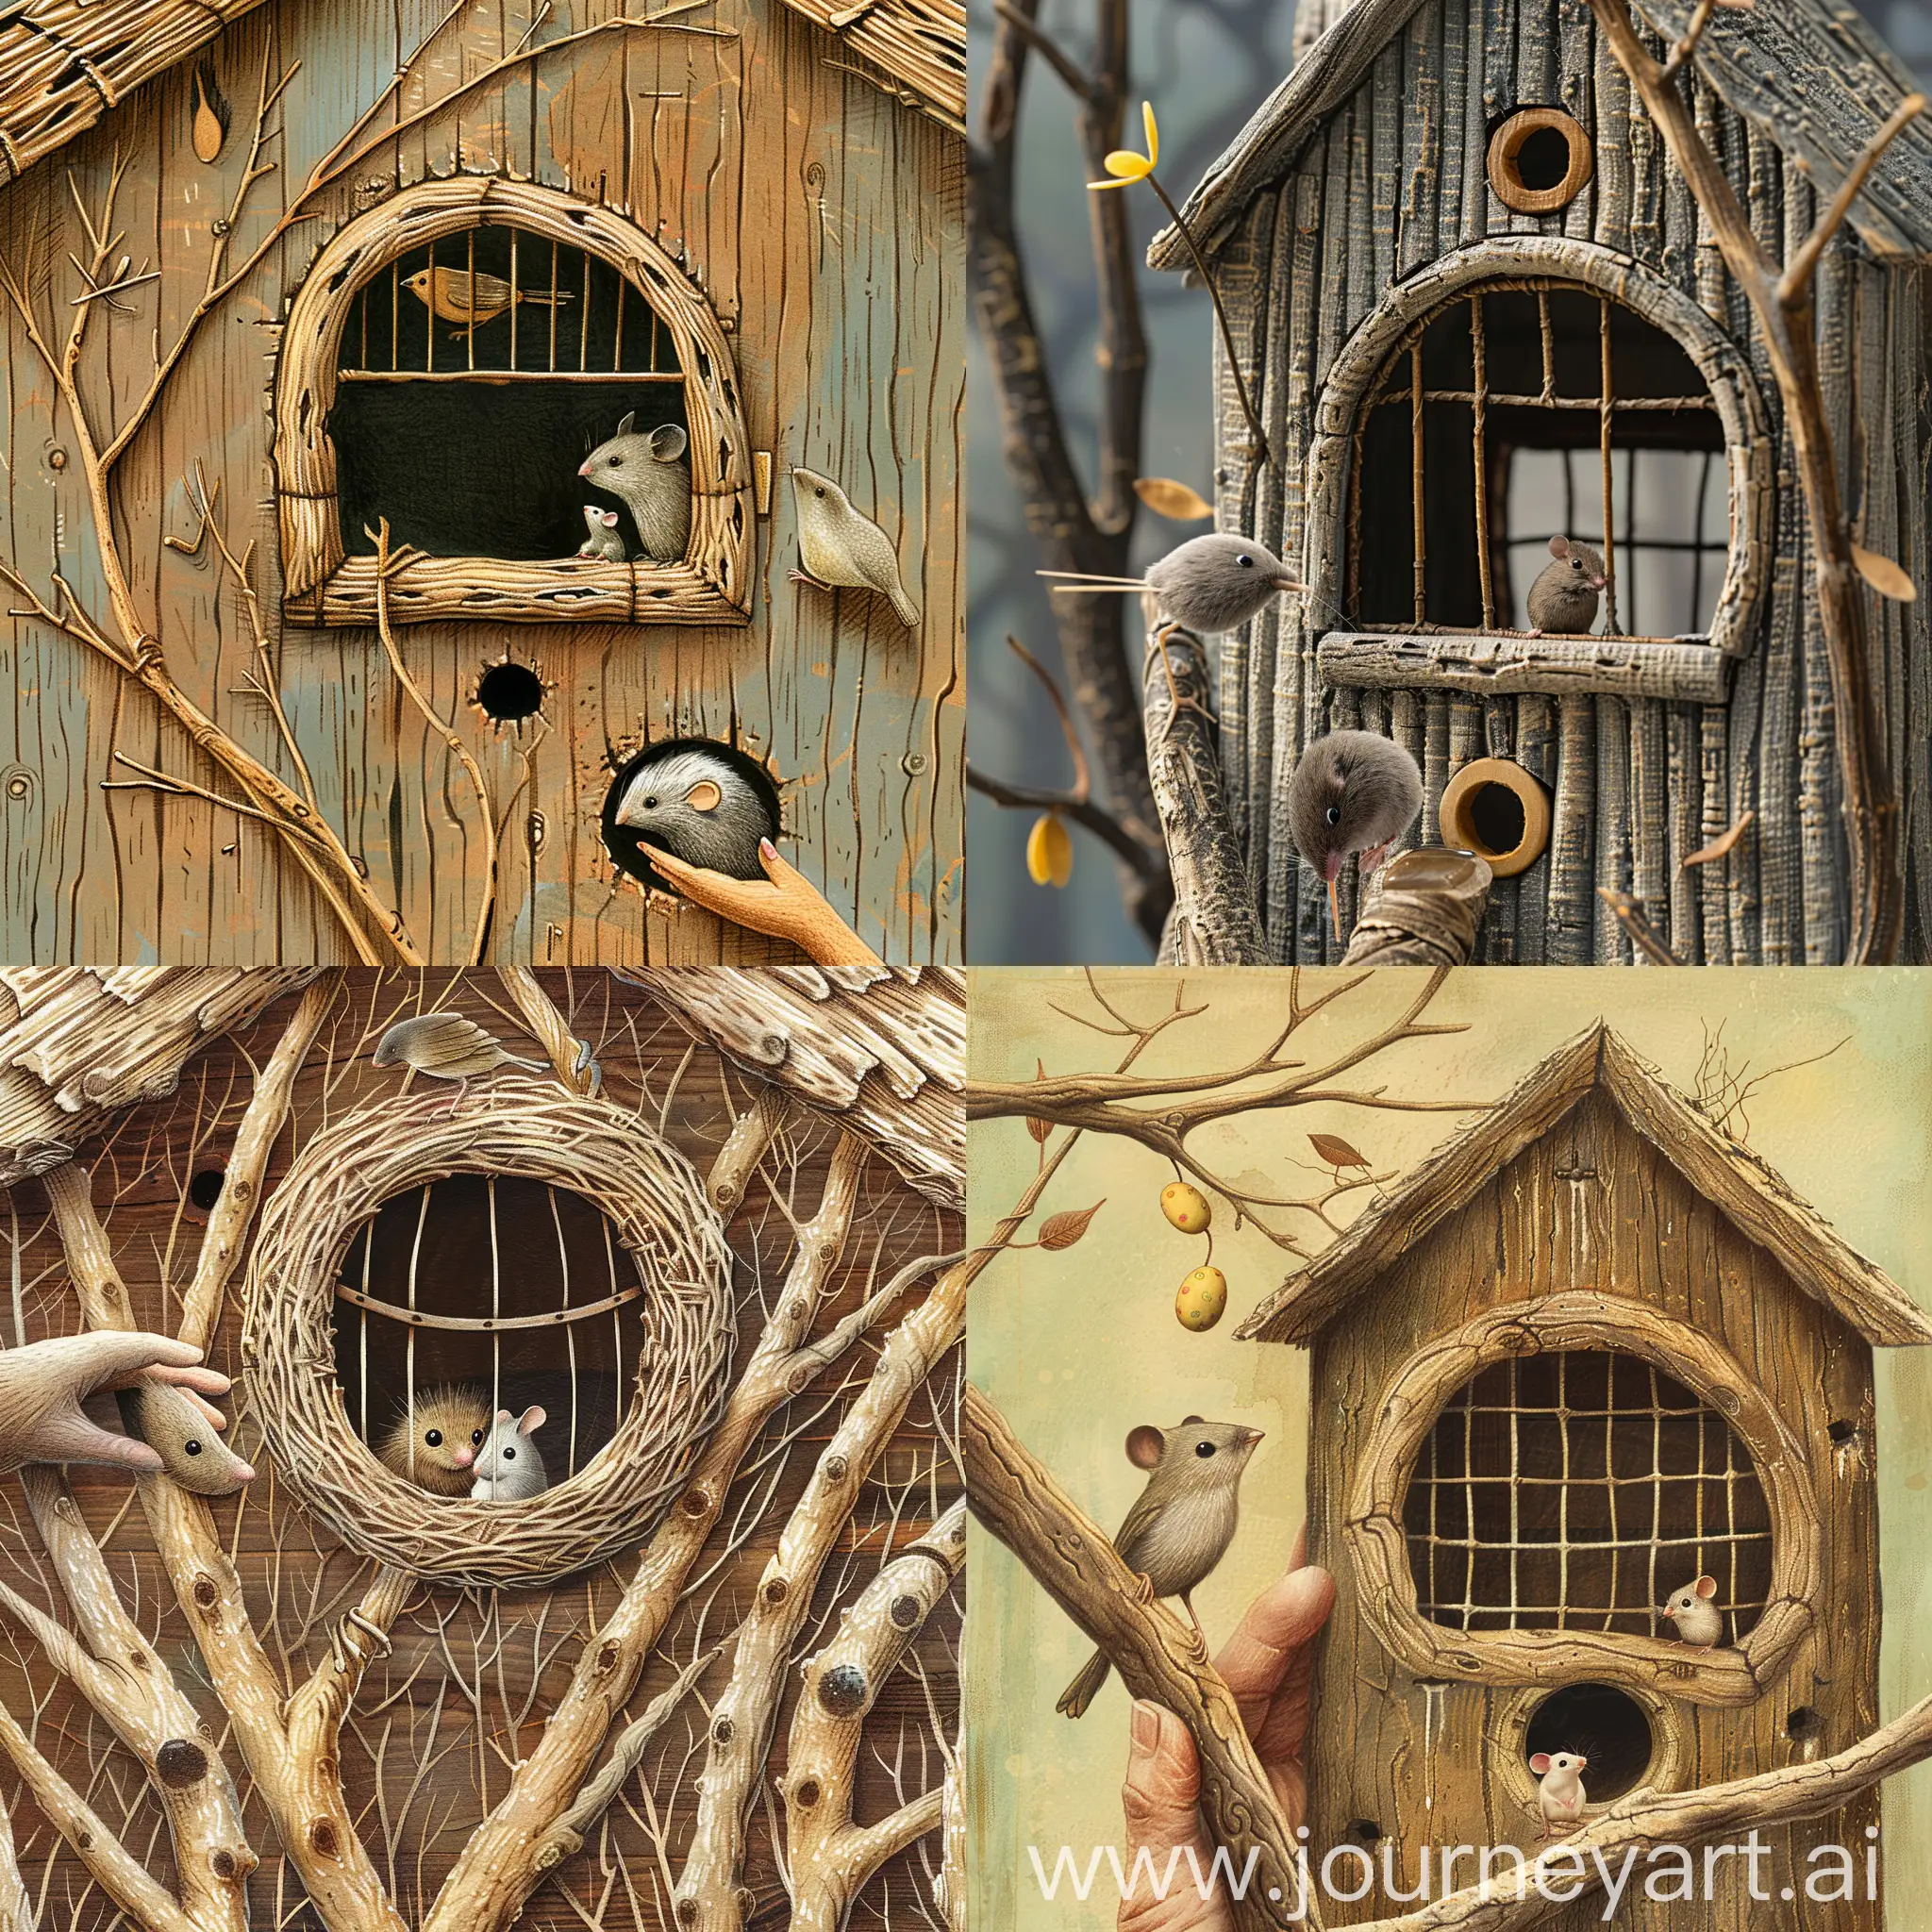 vintage twig hand, window and hole, house shaped birdcage made of wood, little mouse outside (in focus), two birds in the hole of the birdcage, simple image pattern, hand drawn, Easter colors, abstract, bright and whimsical, funny, children's storybook style, webtoon style